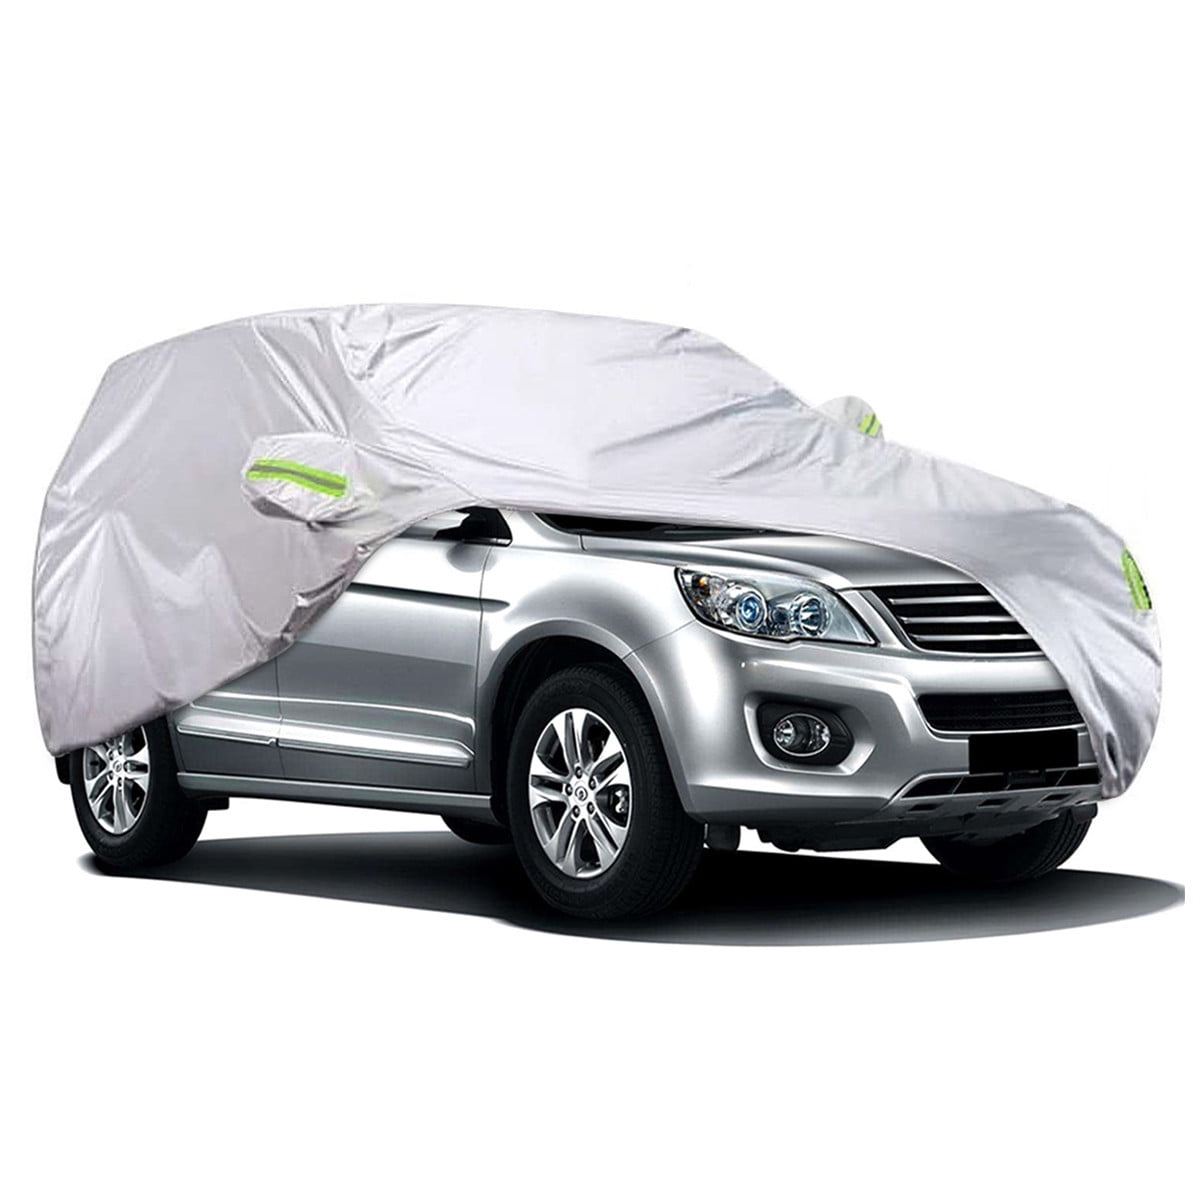 KAKIT SUV Cover Snowproof Waterproof All Weather Polyester Sun UV Protection Windproof Universal Outdoor Car Cover for SUV with Driver Door Zipper Fits up to 194 